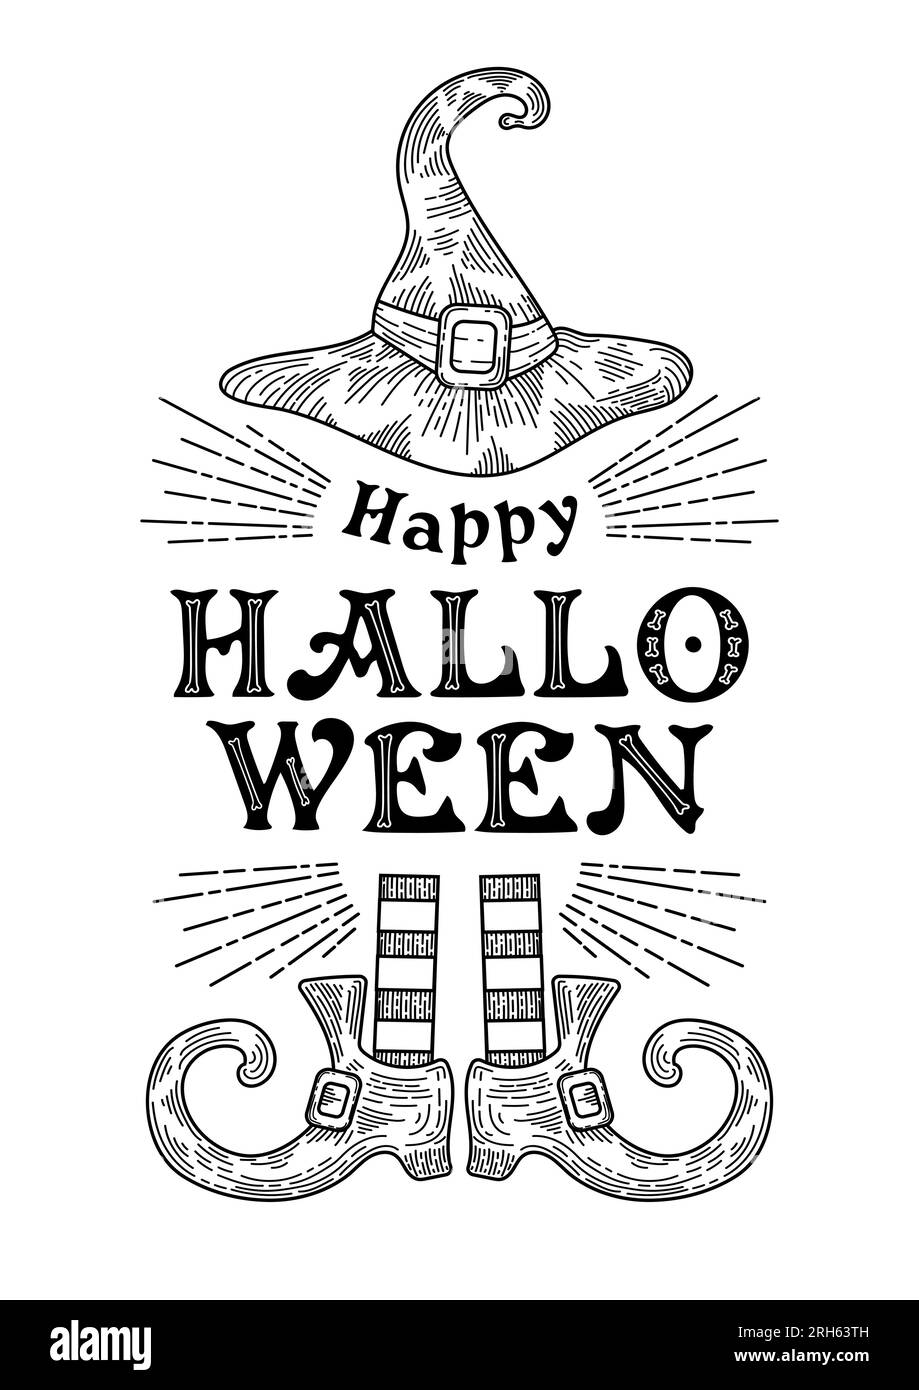 Happy halloween. Witch hat, striped stockings, buckled shoes. Retro lettering with bones. Vintage illustration in engraving style. For posters, postca Stock Vector